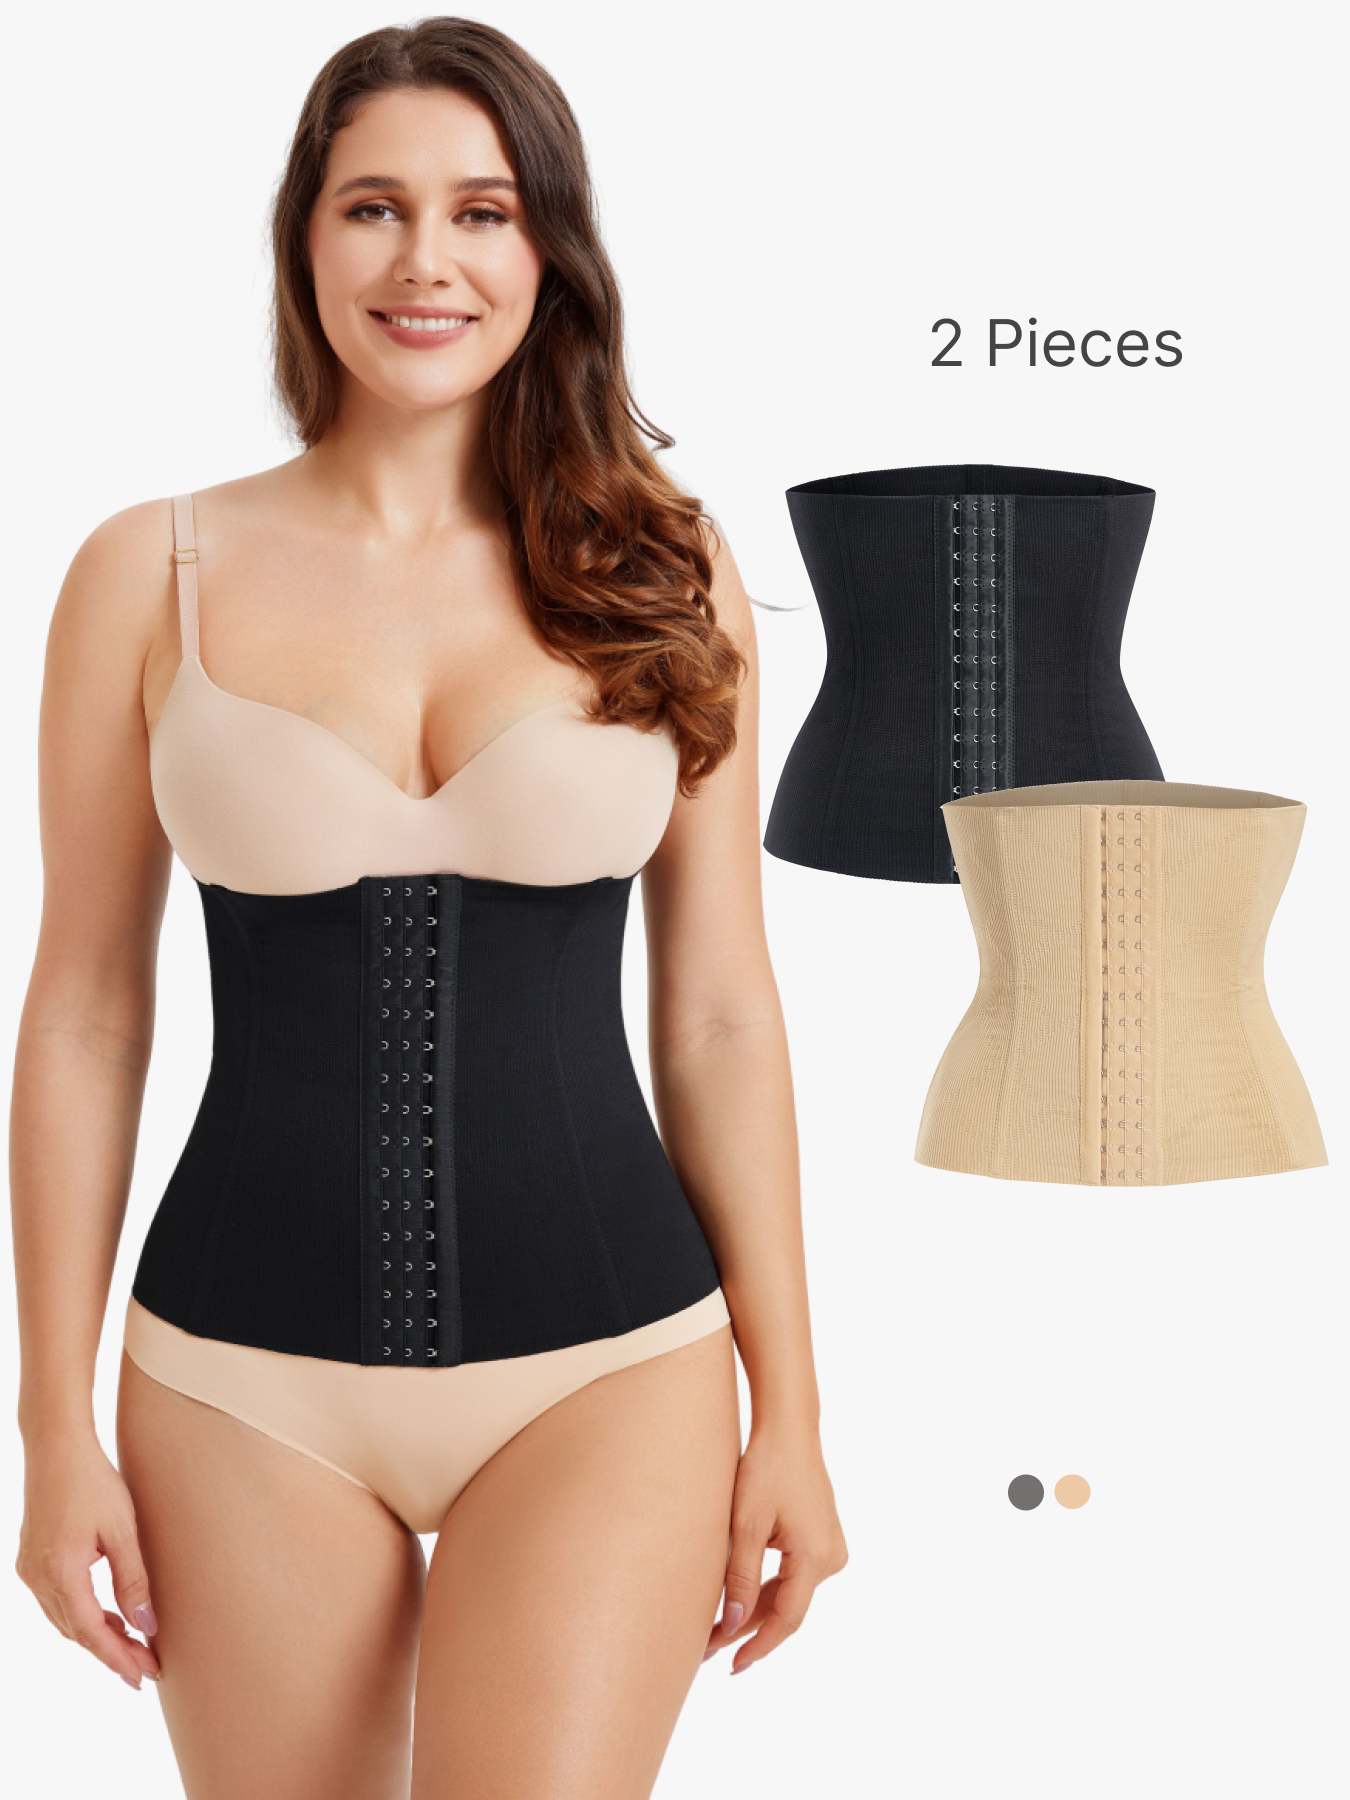 BRABIC 2-Piece Set Tummy Control Waist Trainer Corset for Women Belly Band WC007